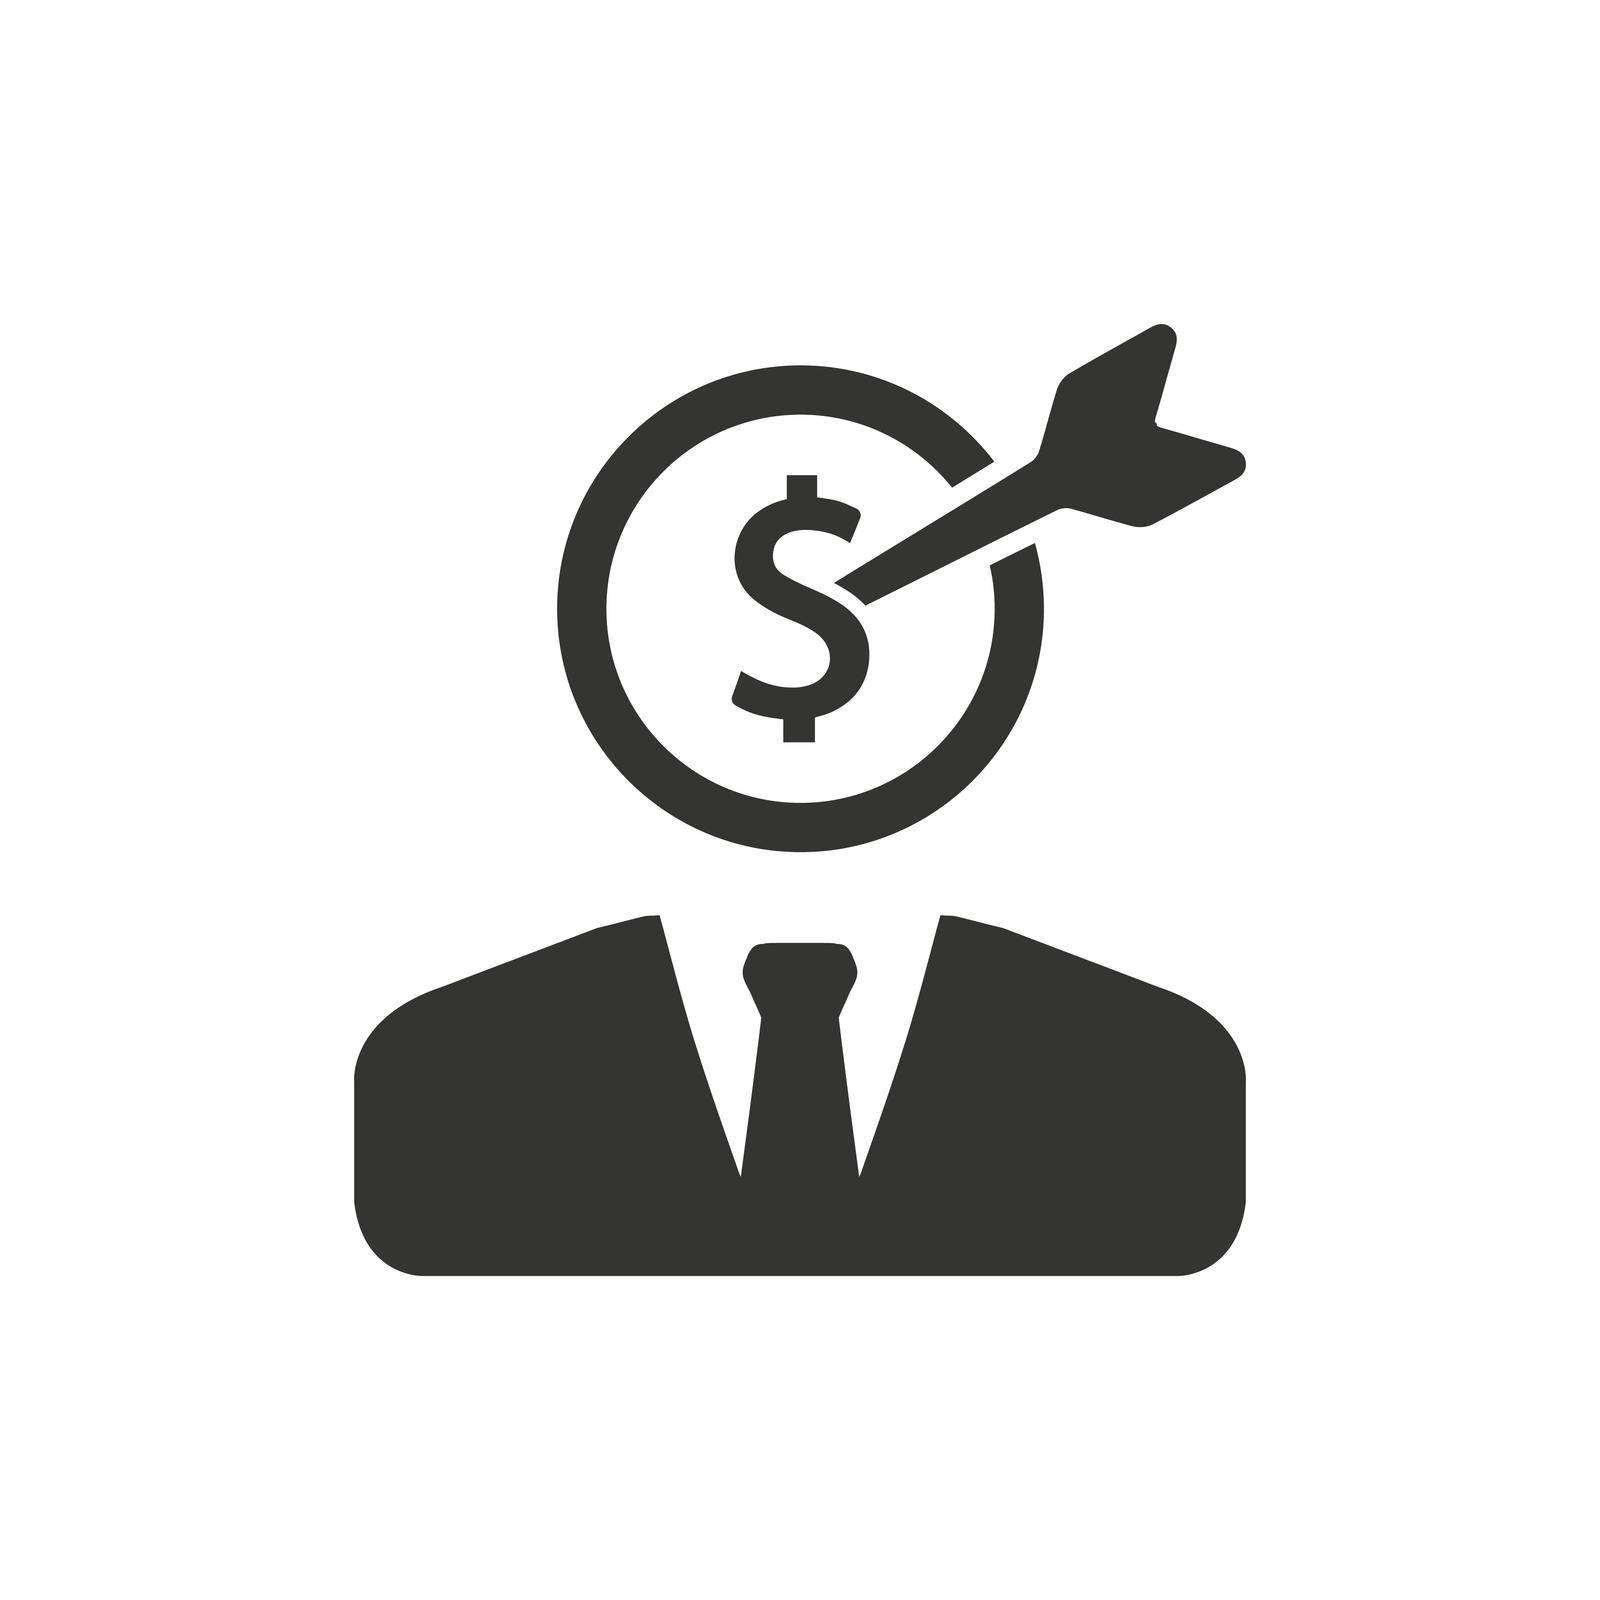 Financial Target icon. Vector EPS file.